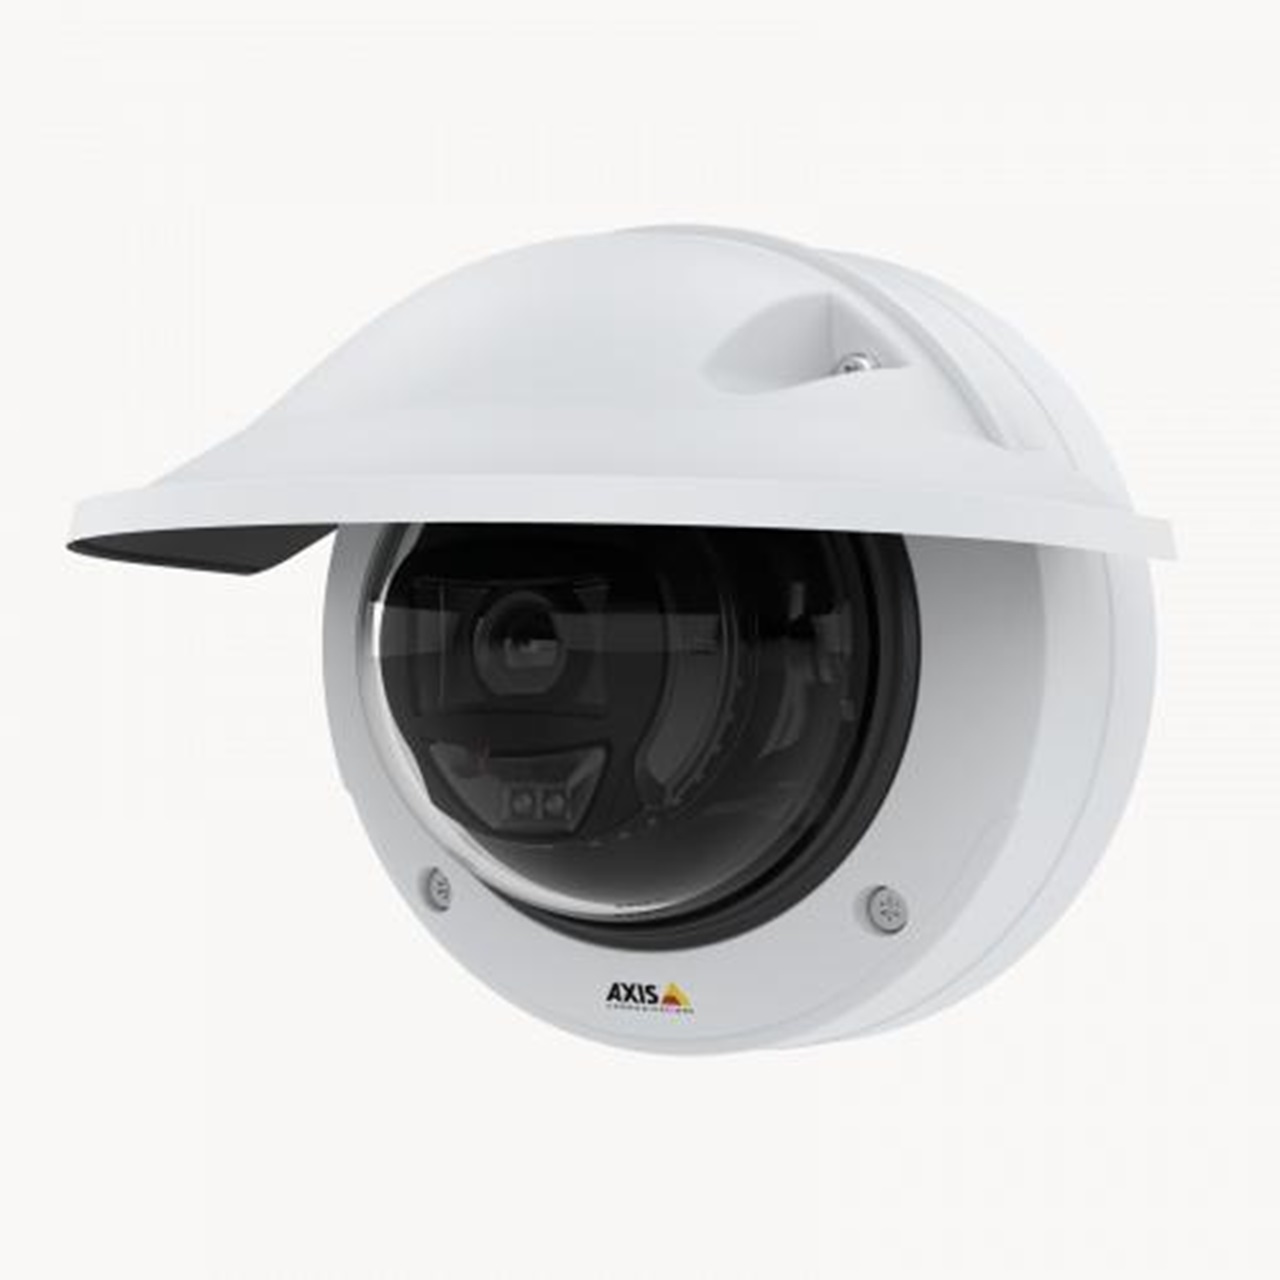 Image of AXIS P3255-LVE Optimierte Fixed Dome Kamera für Analysefunktionen mit Deep Learning